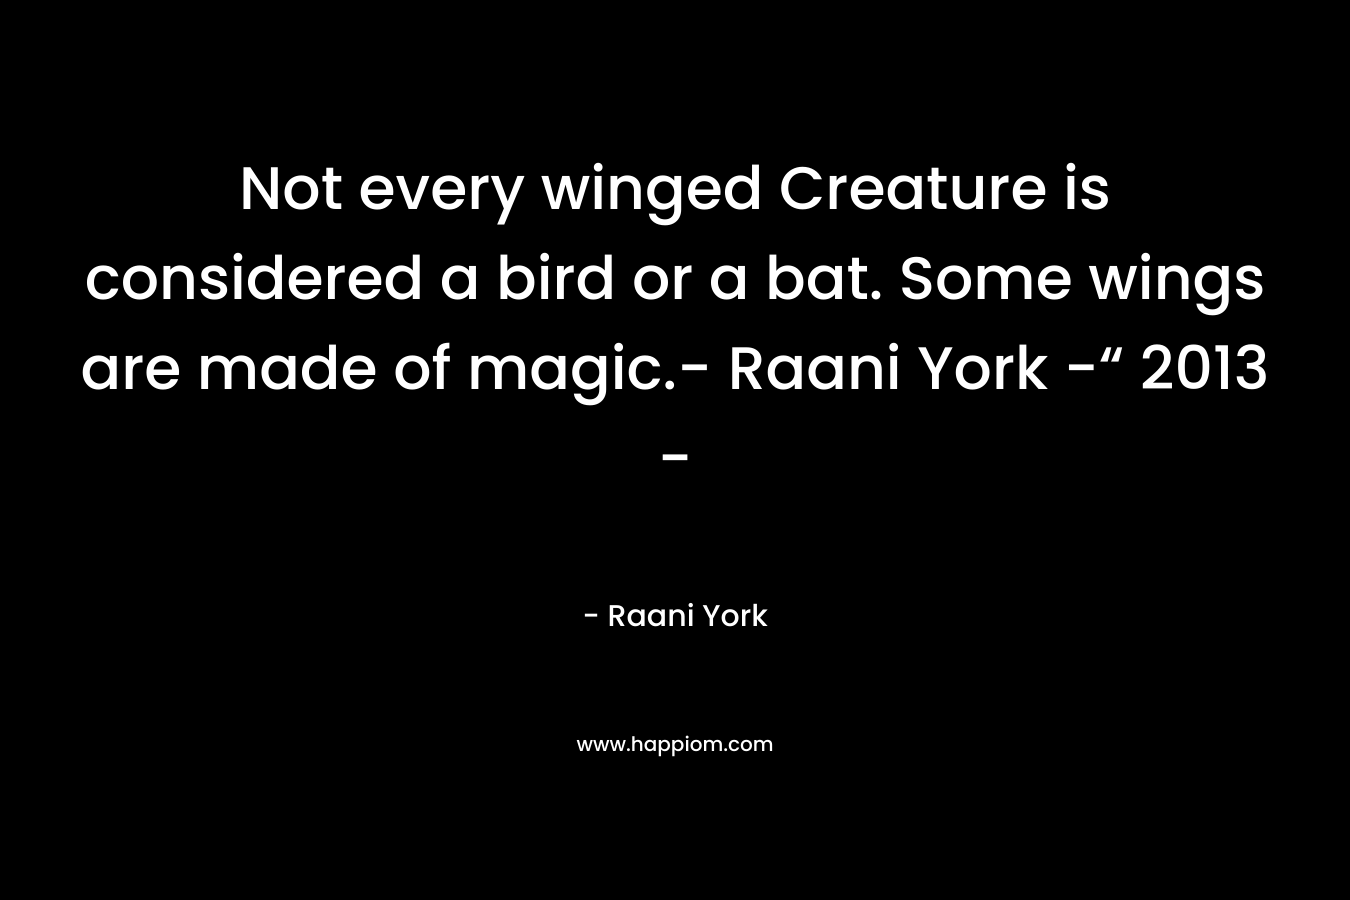 Not every winged Creature is considered a bird or a bat. Some wings are made of magic.- Raani York -“ 2013 – – Raani York